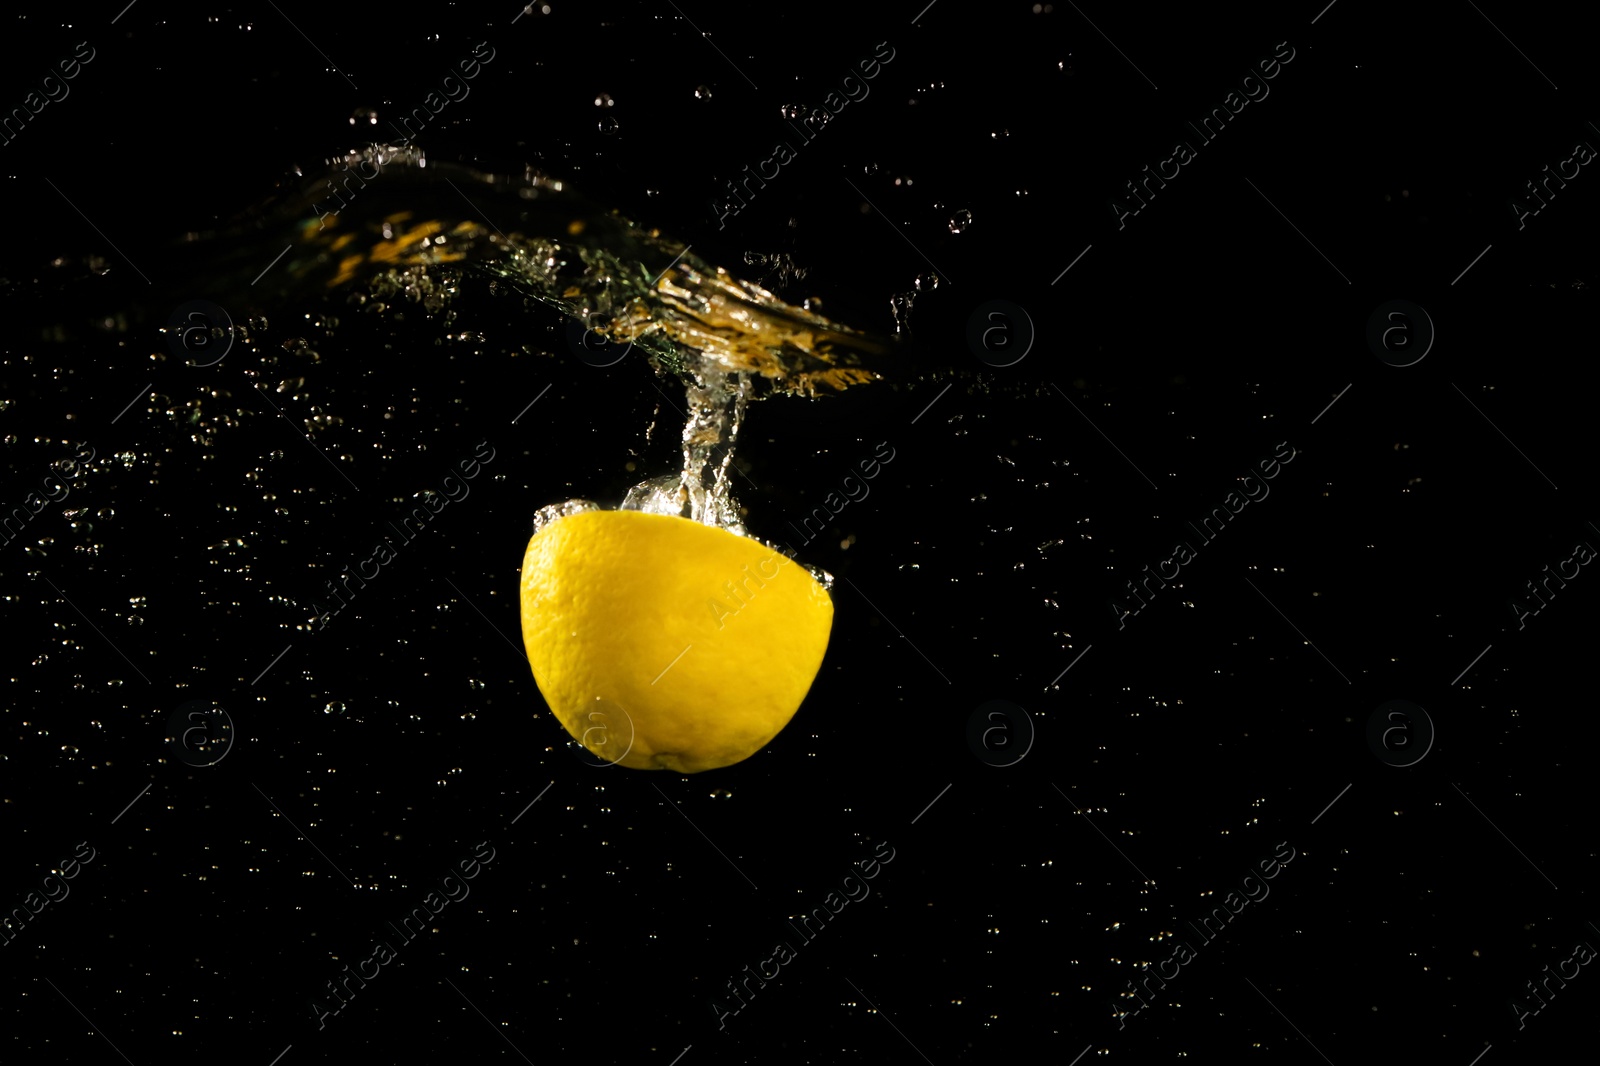 Photo of Lemon half falling down into clear water against black background